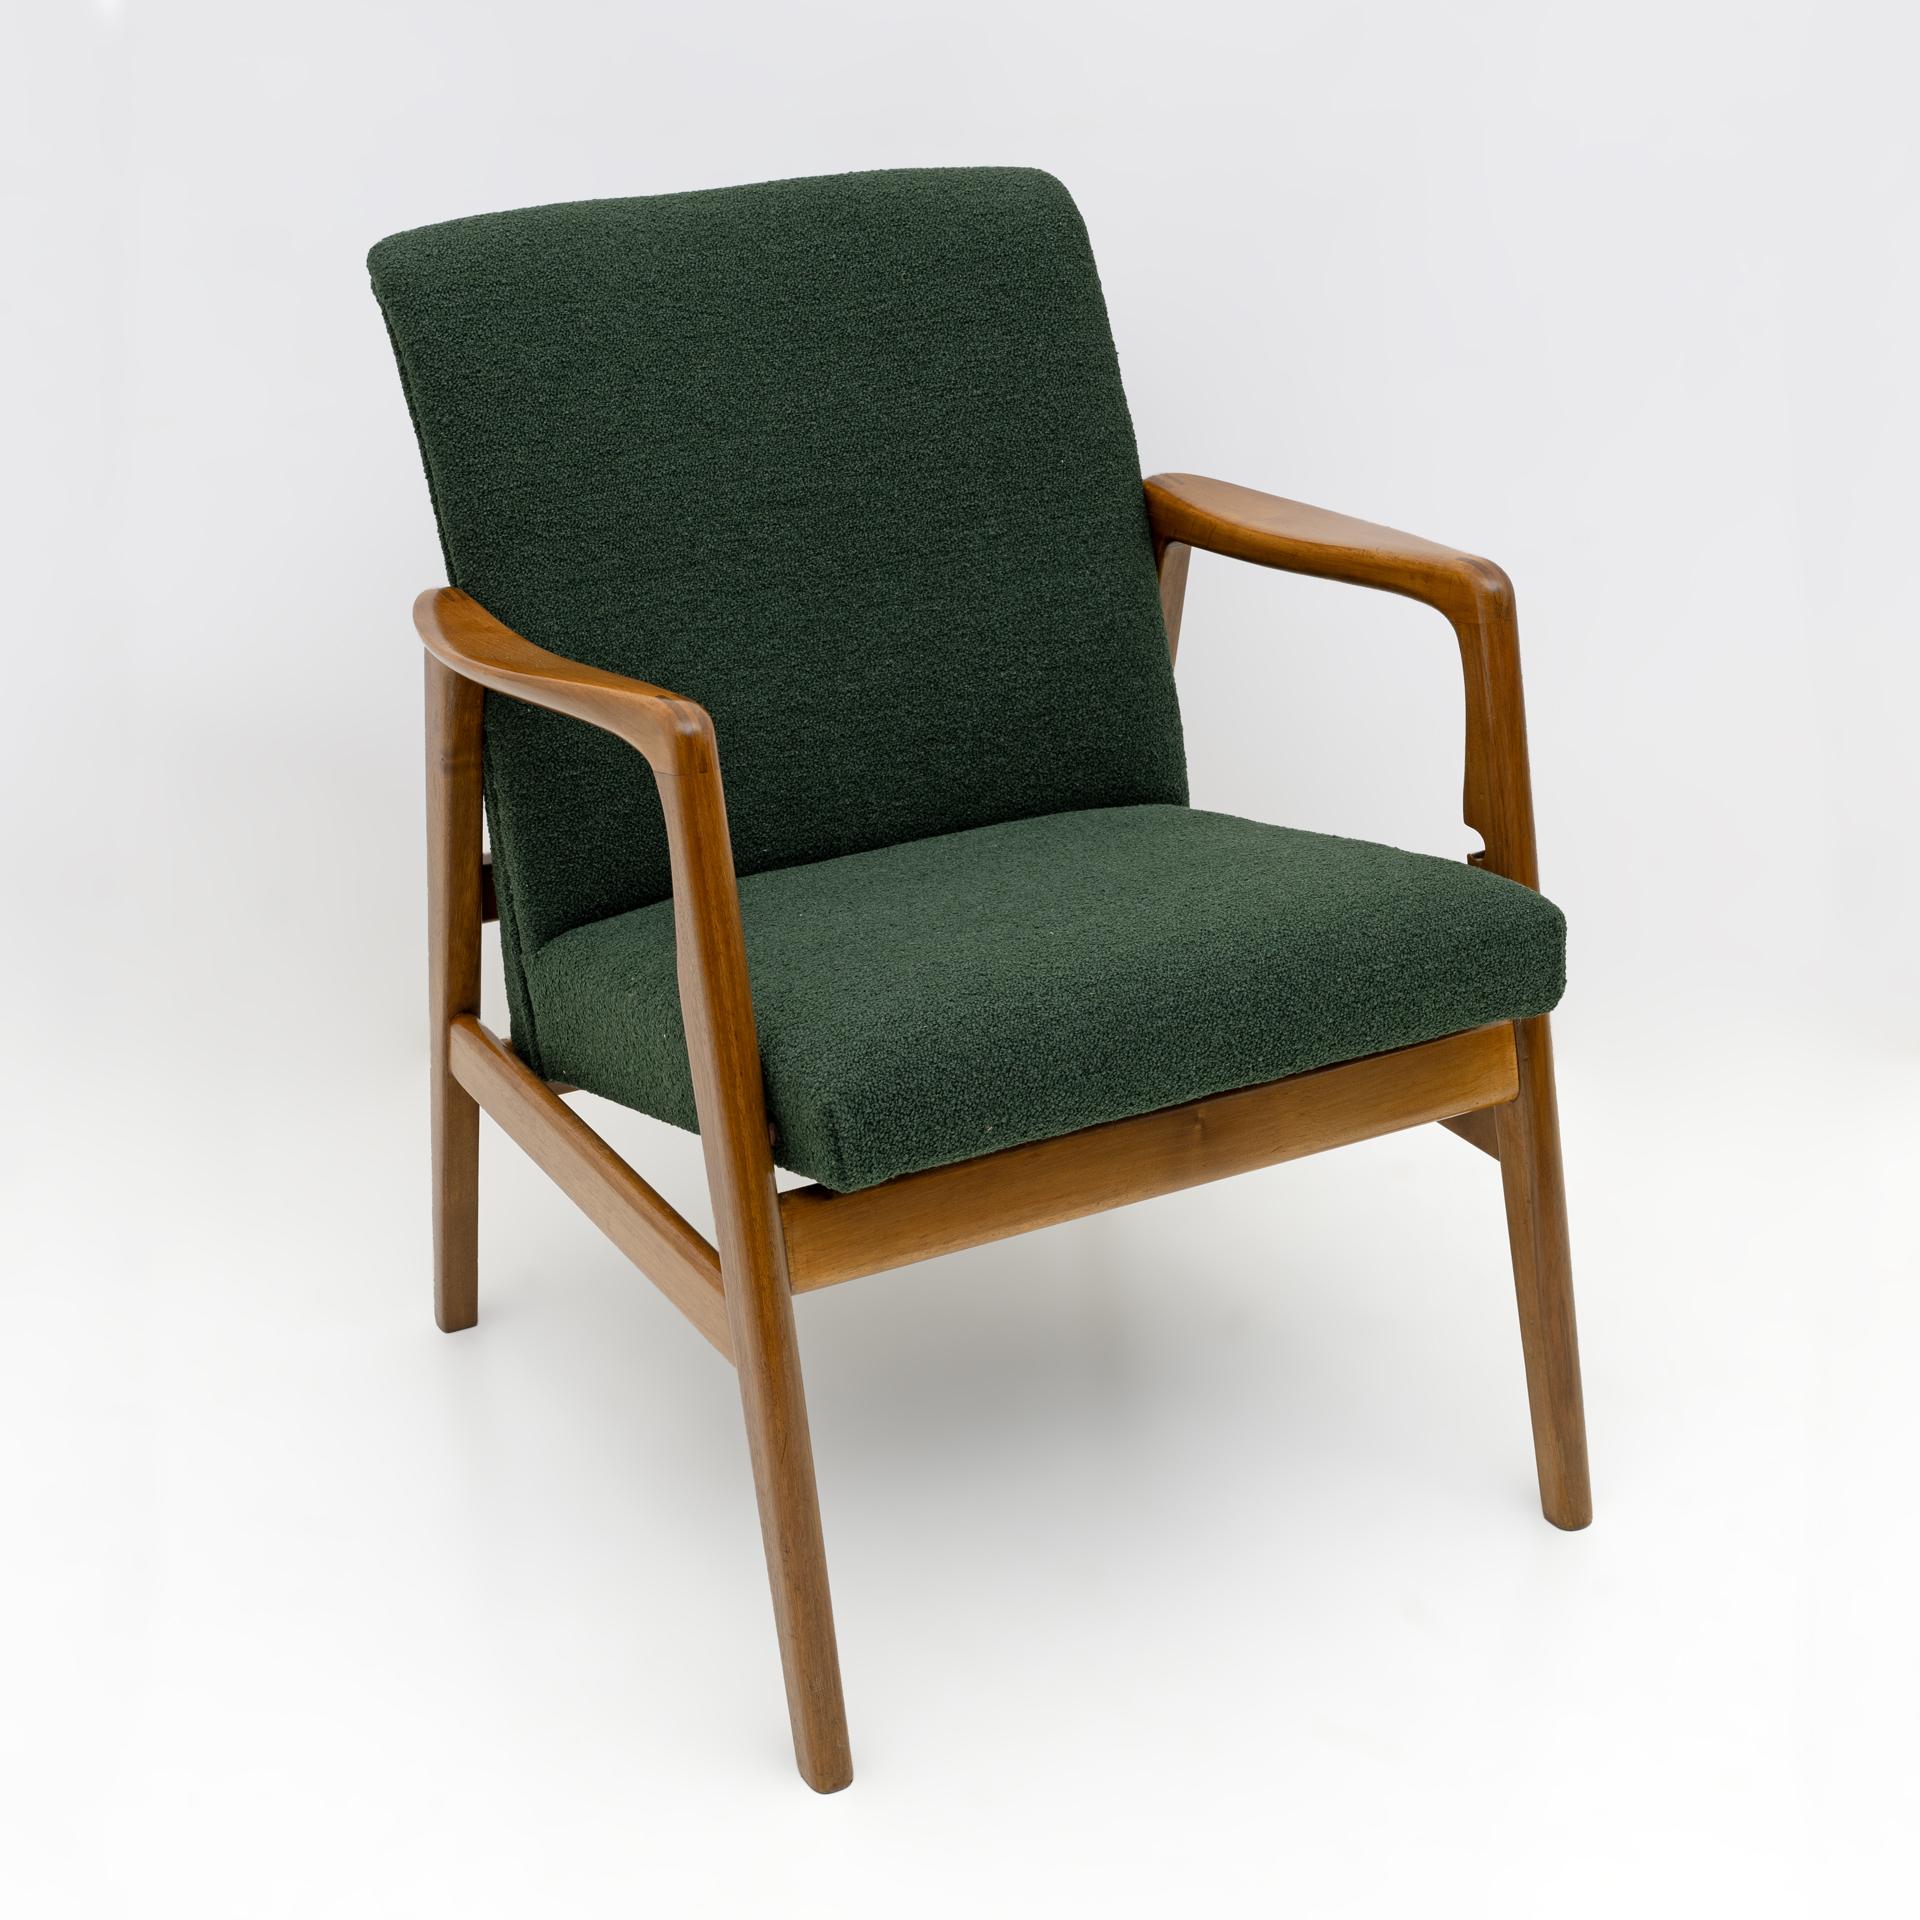 Gio Ponti armchair for Figli by Amedeo Cassina
Manufacturing label. Designed for Hotel Parco dei Principi in Sorrento, 1950s.
The armchair has two comfort positions thanks to a simple hand-made movement to choose between two different